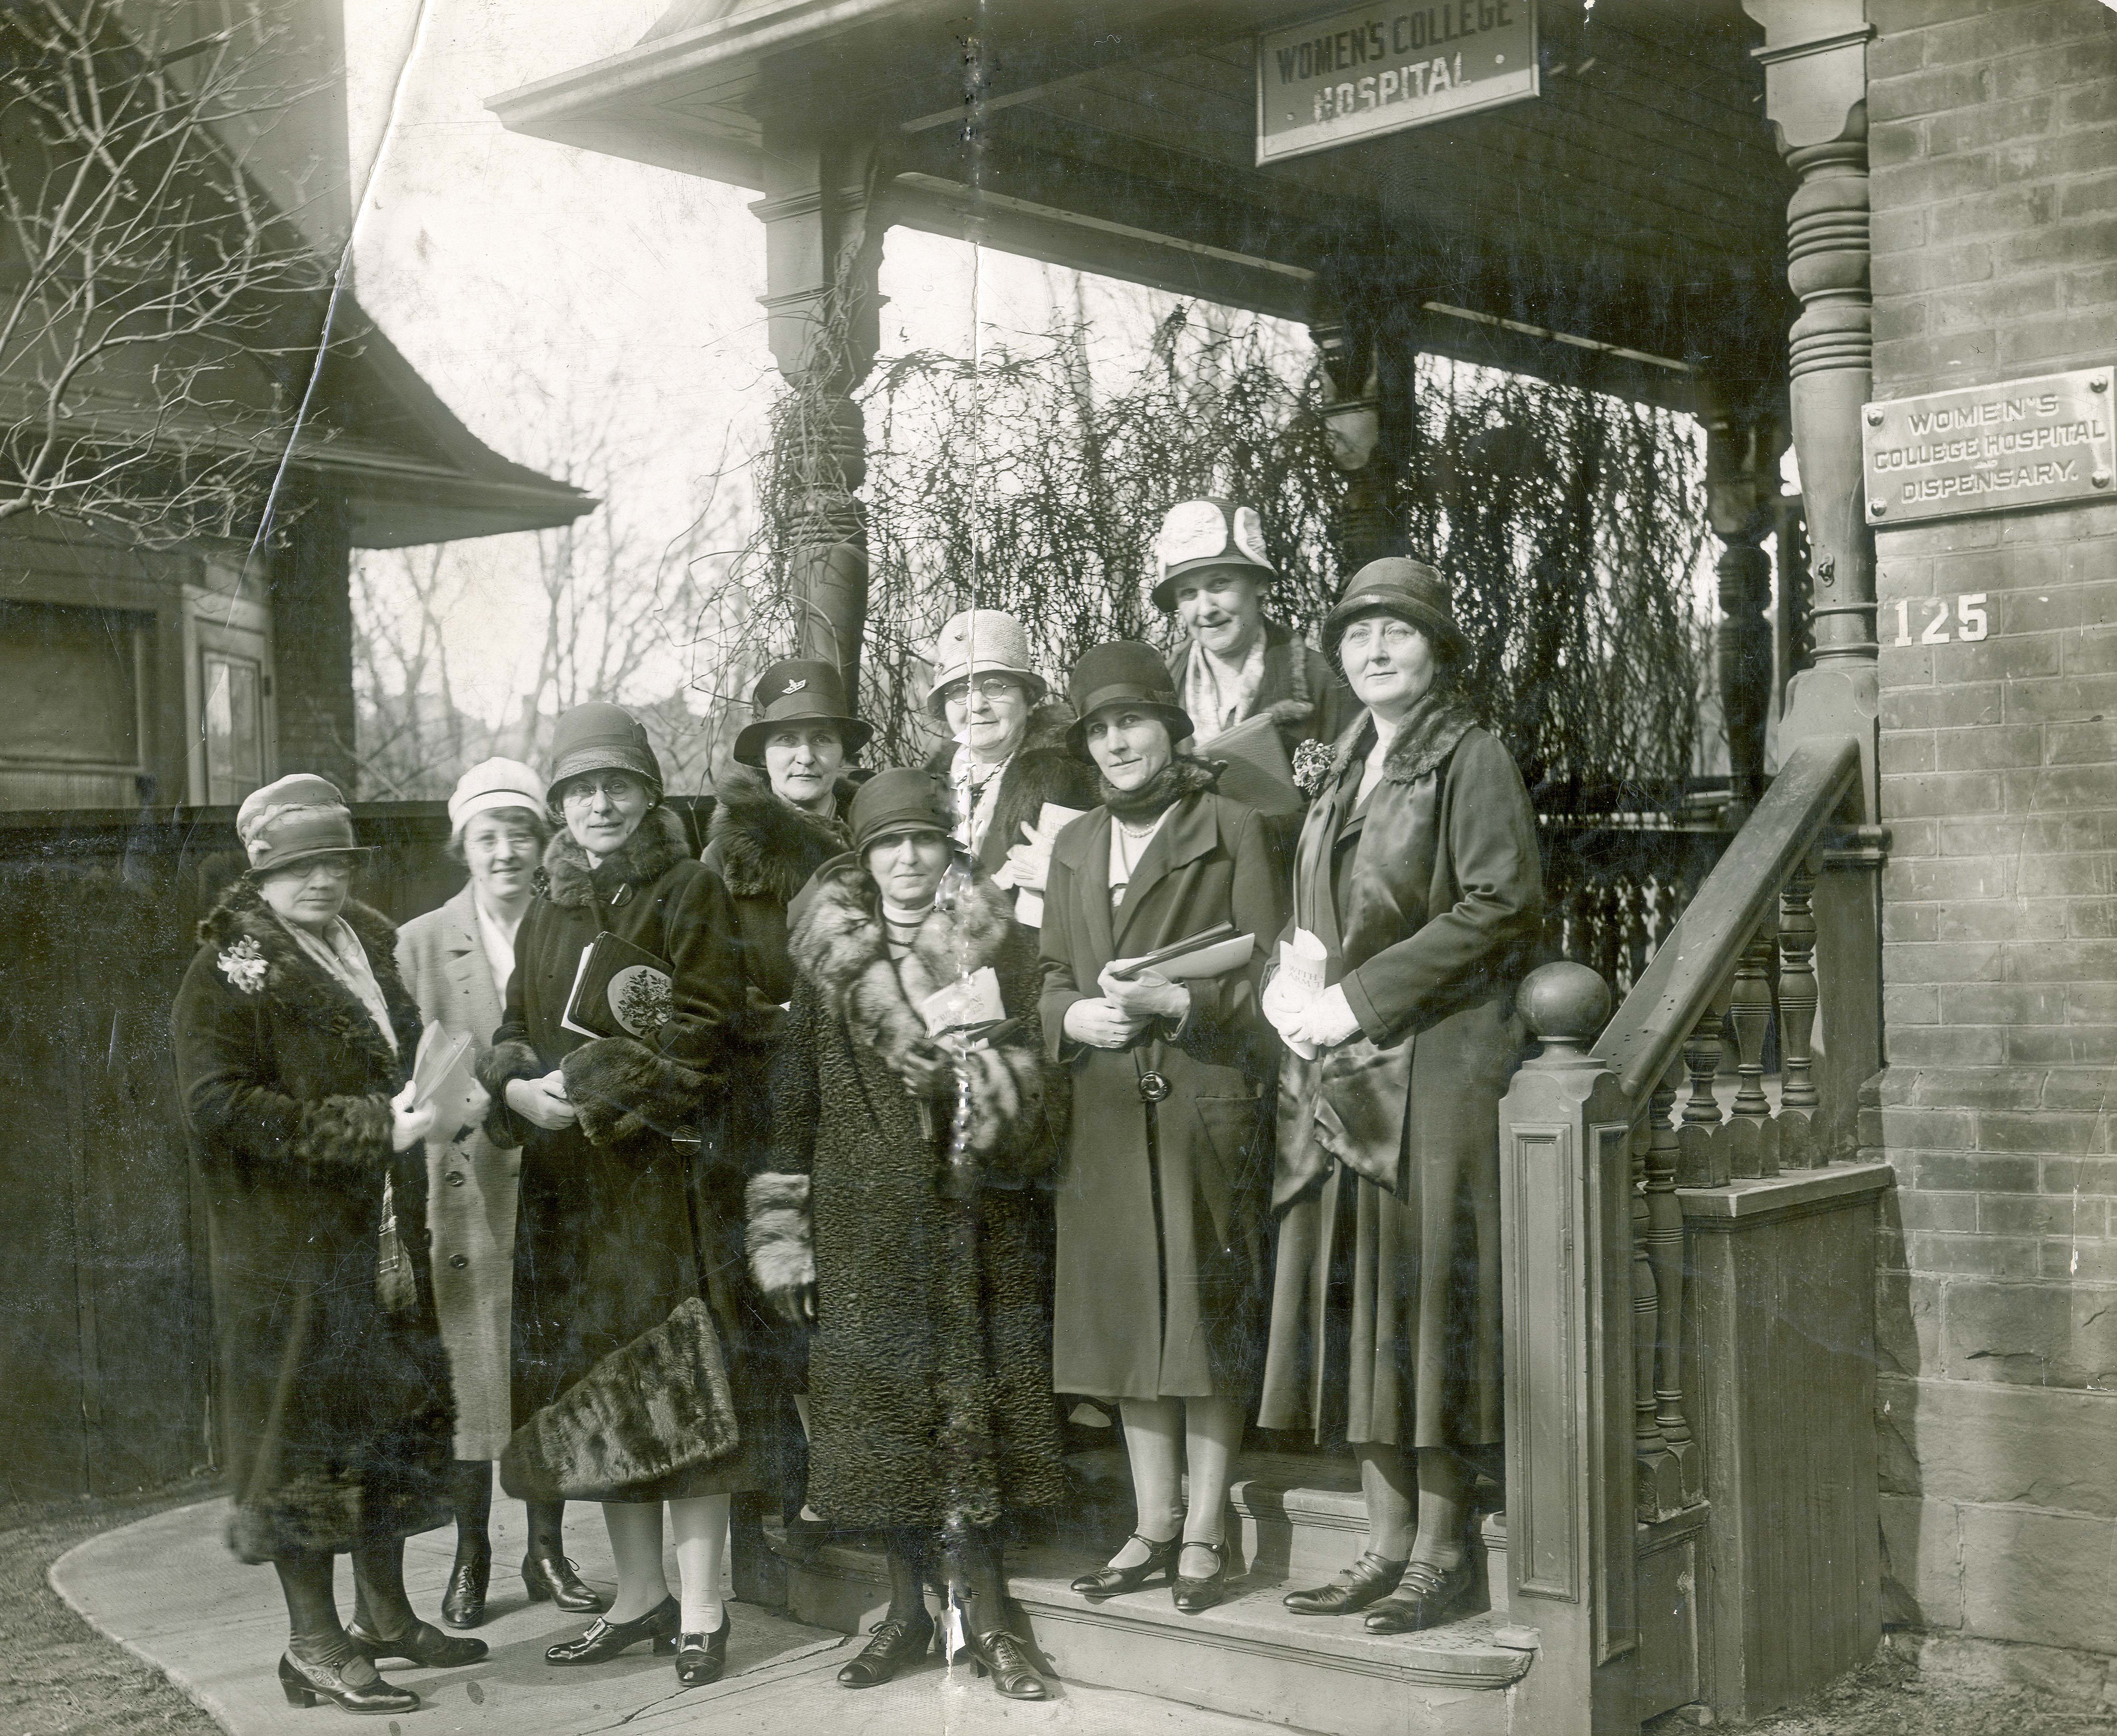 A group of fashionably dressed women stand outside a building with a small sign reading "Women's College Hospital" in a black and white photo.